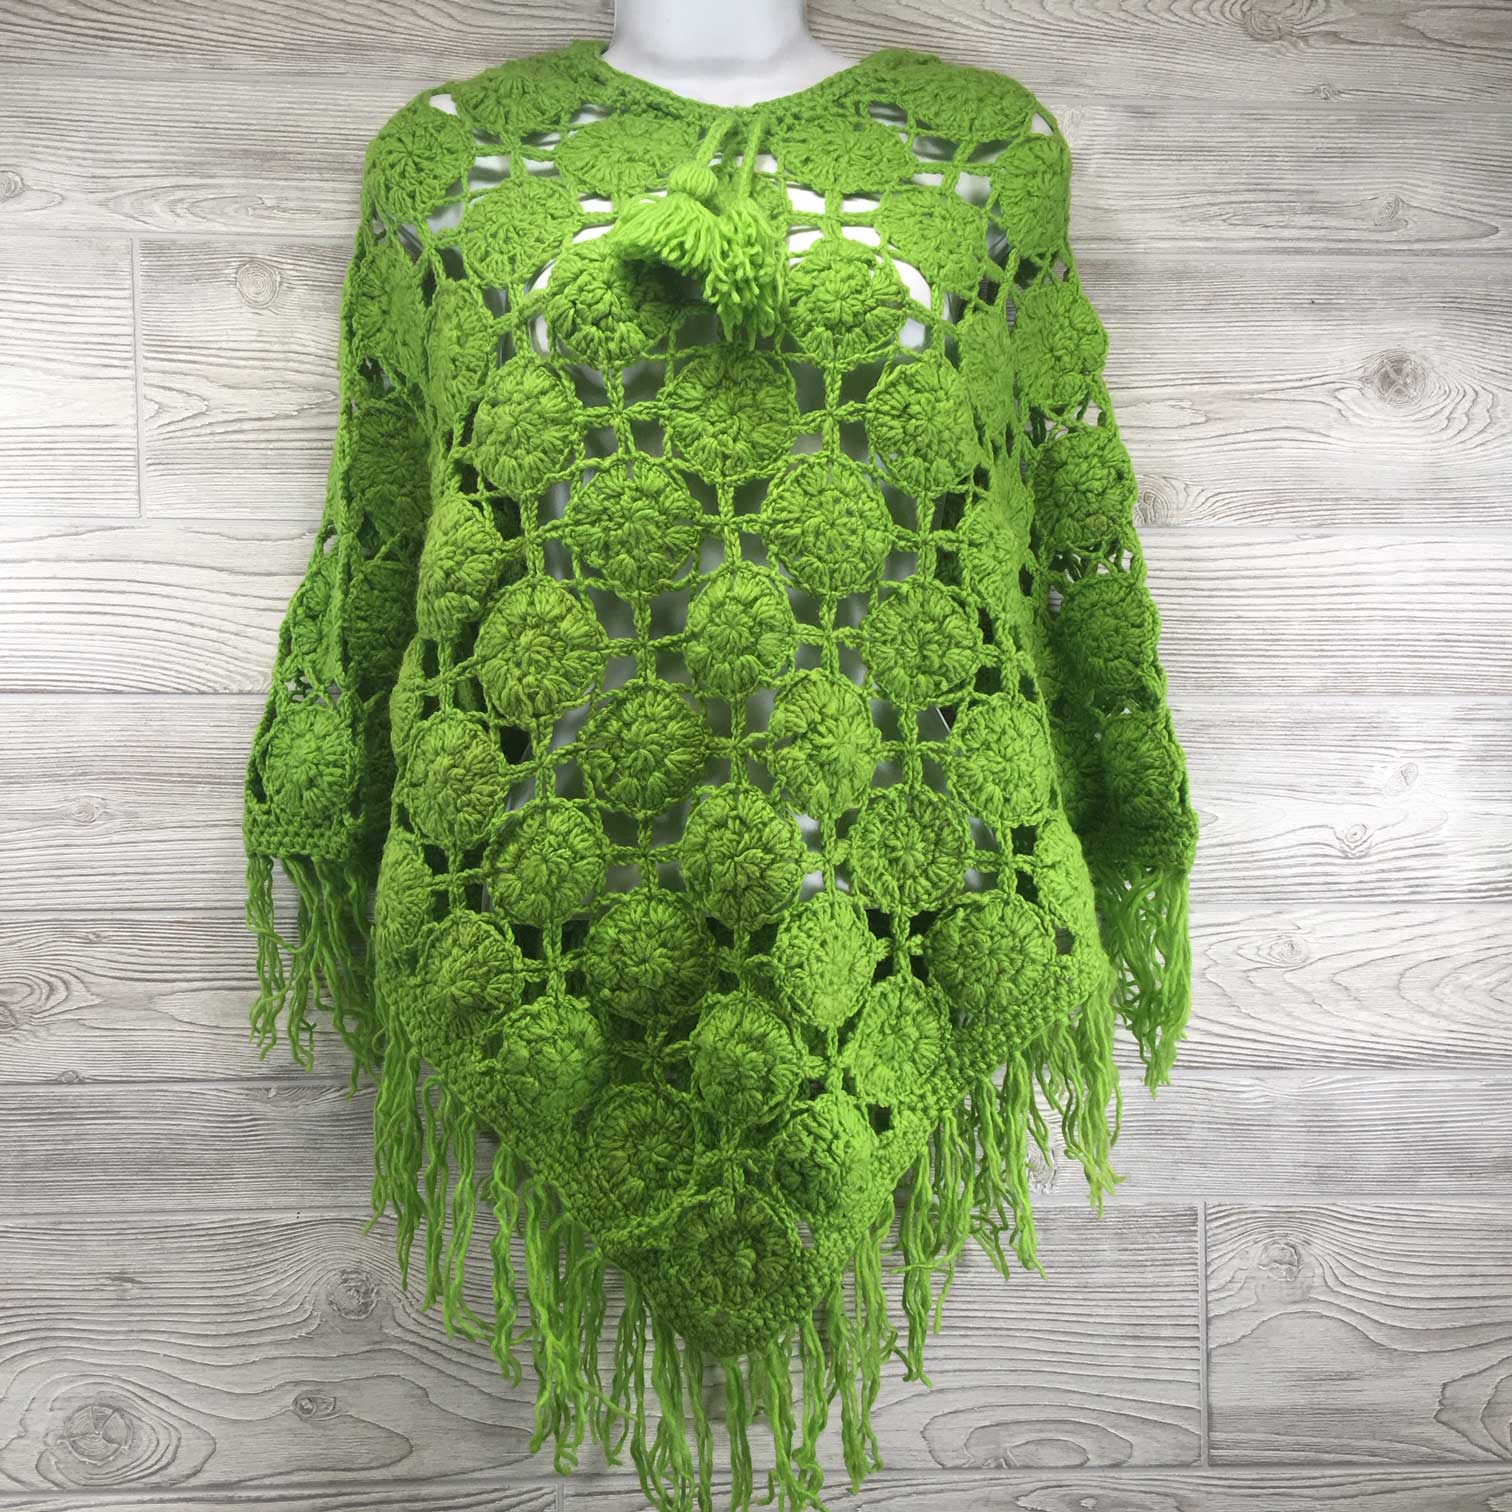 Women's Crochet Granny Square Boho Wool Poncho with Fringes - One Size Fits Small to Medium - Green